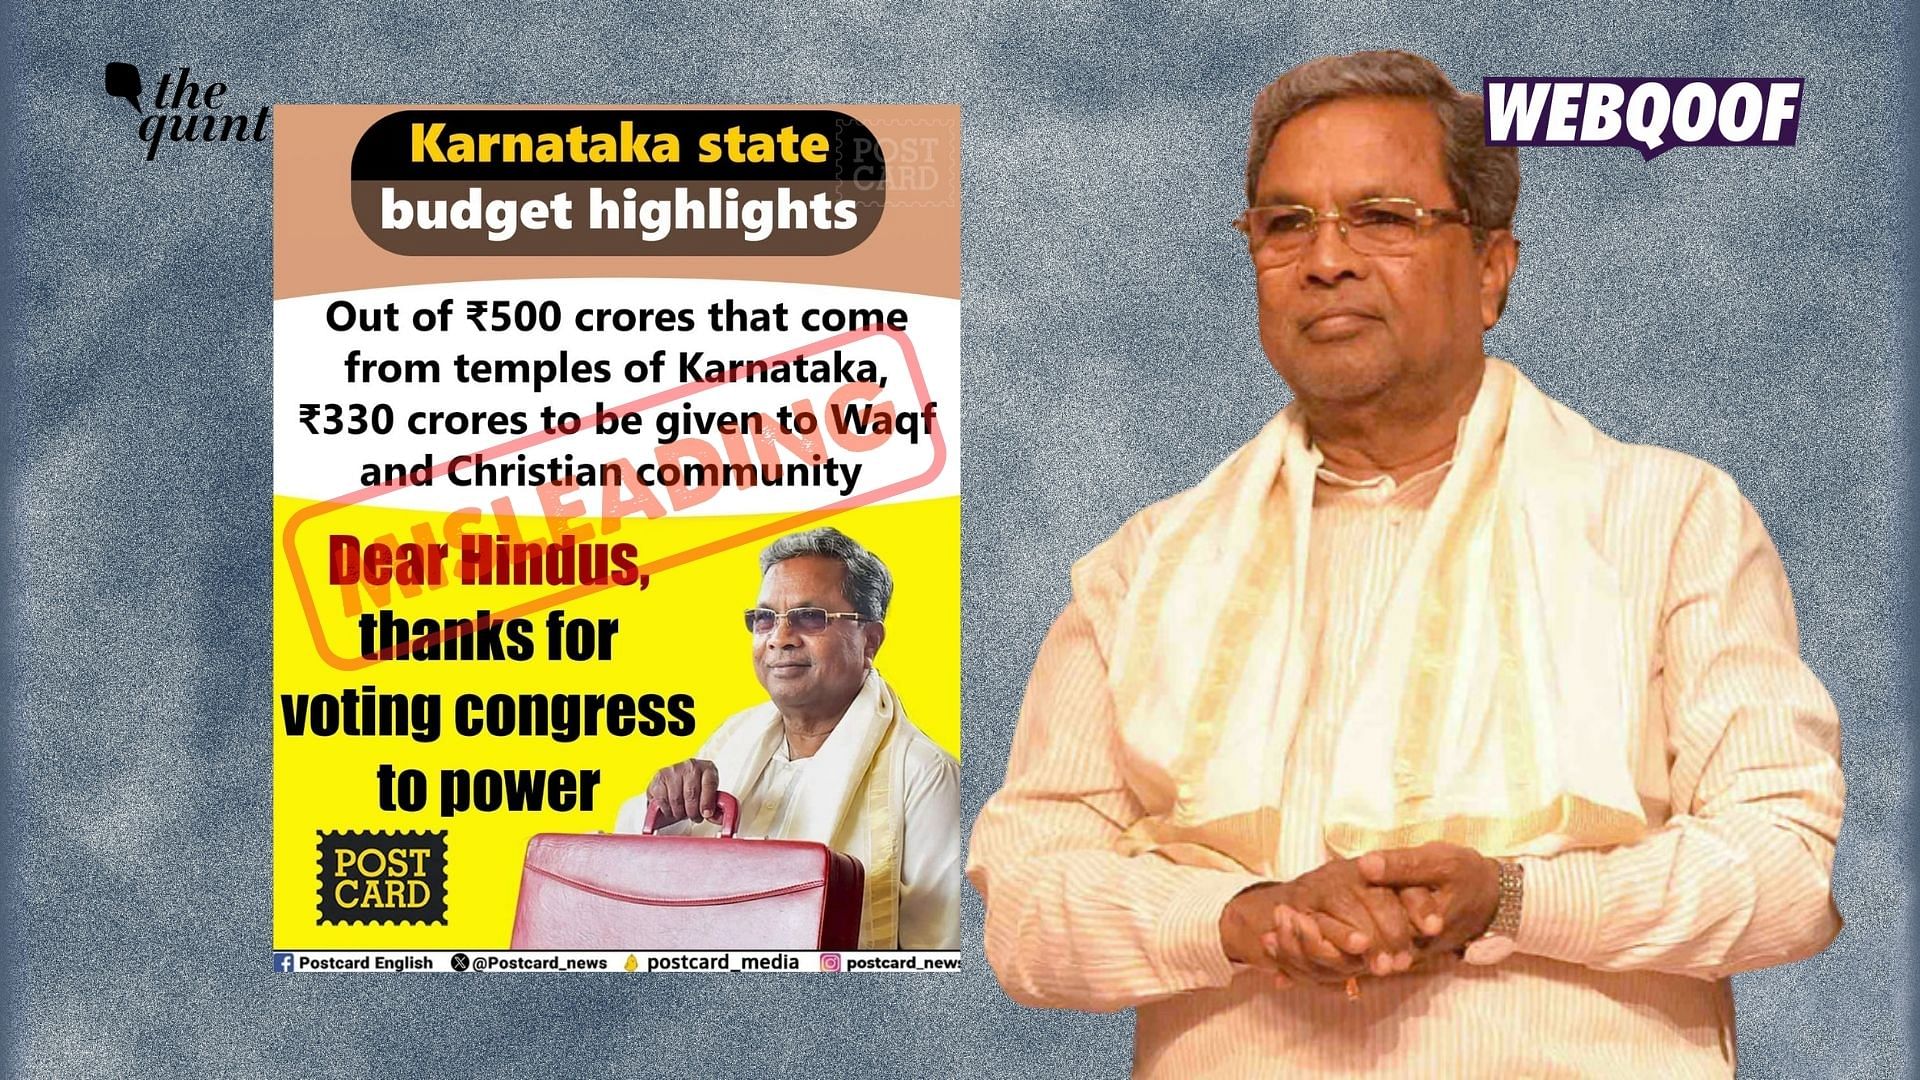 <div class="paragraphs"><p>The claim that Karnataka government is taking money brought in by temples and giving it to the Waqf board and Christian communities is misleading.</p></div>